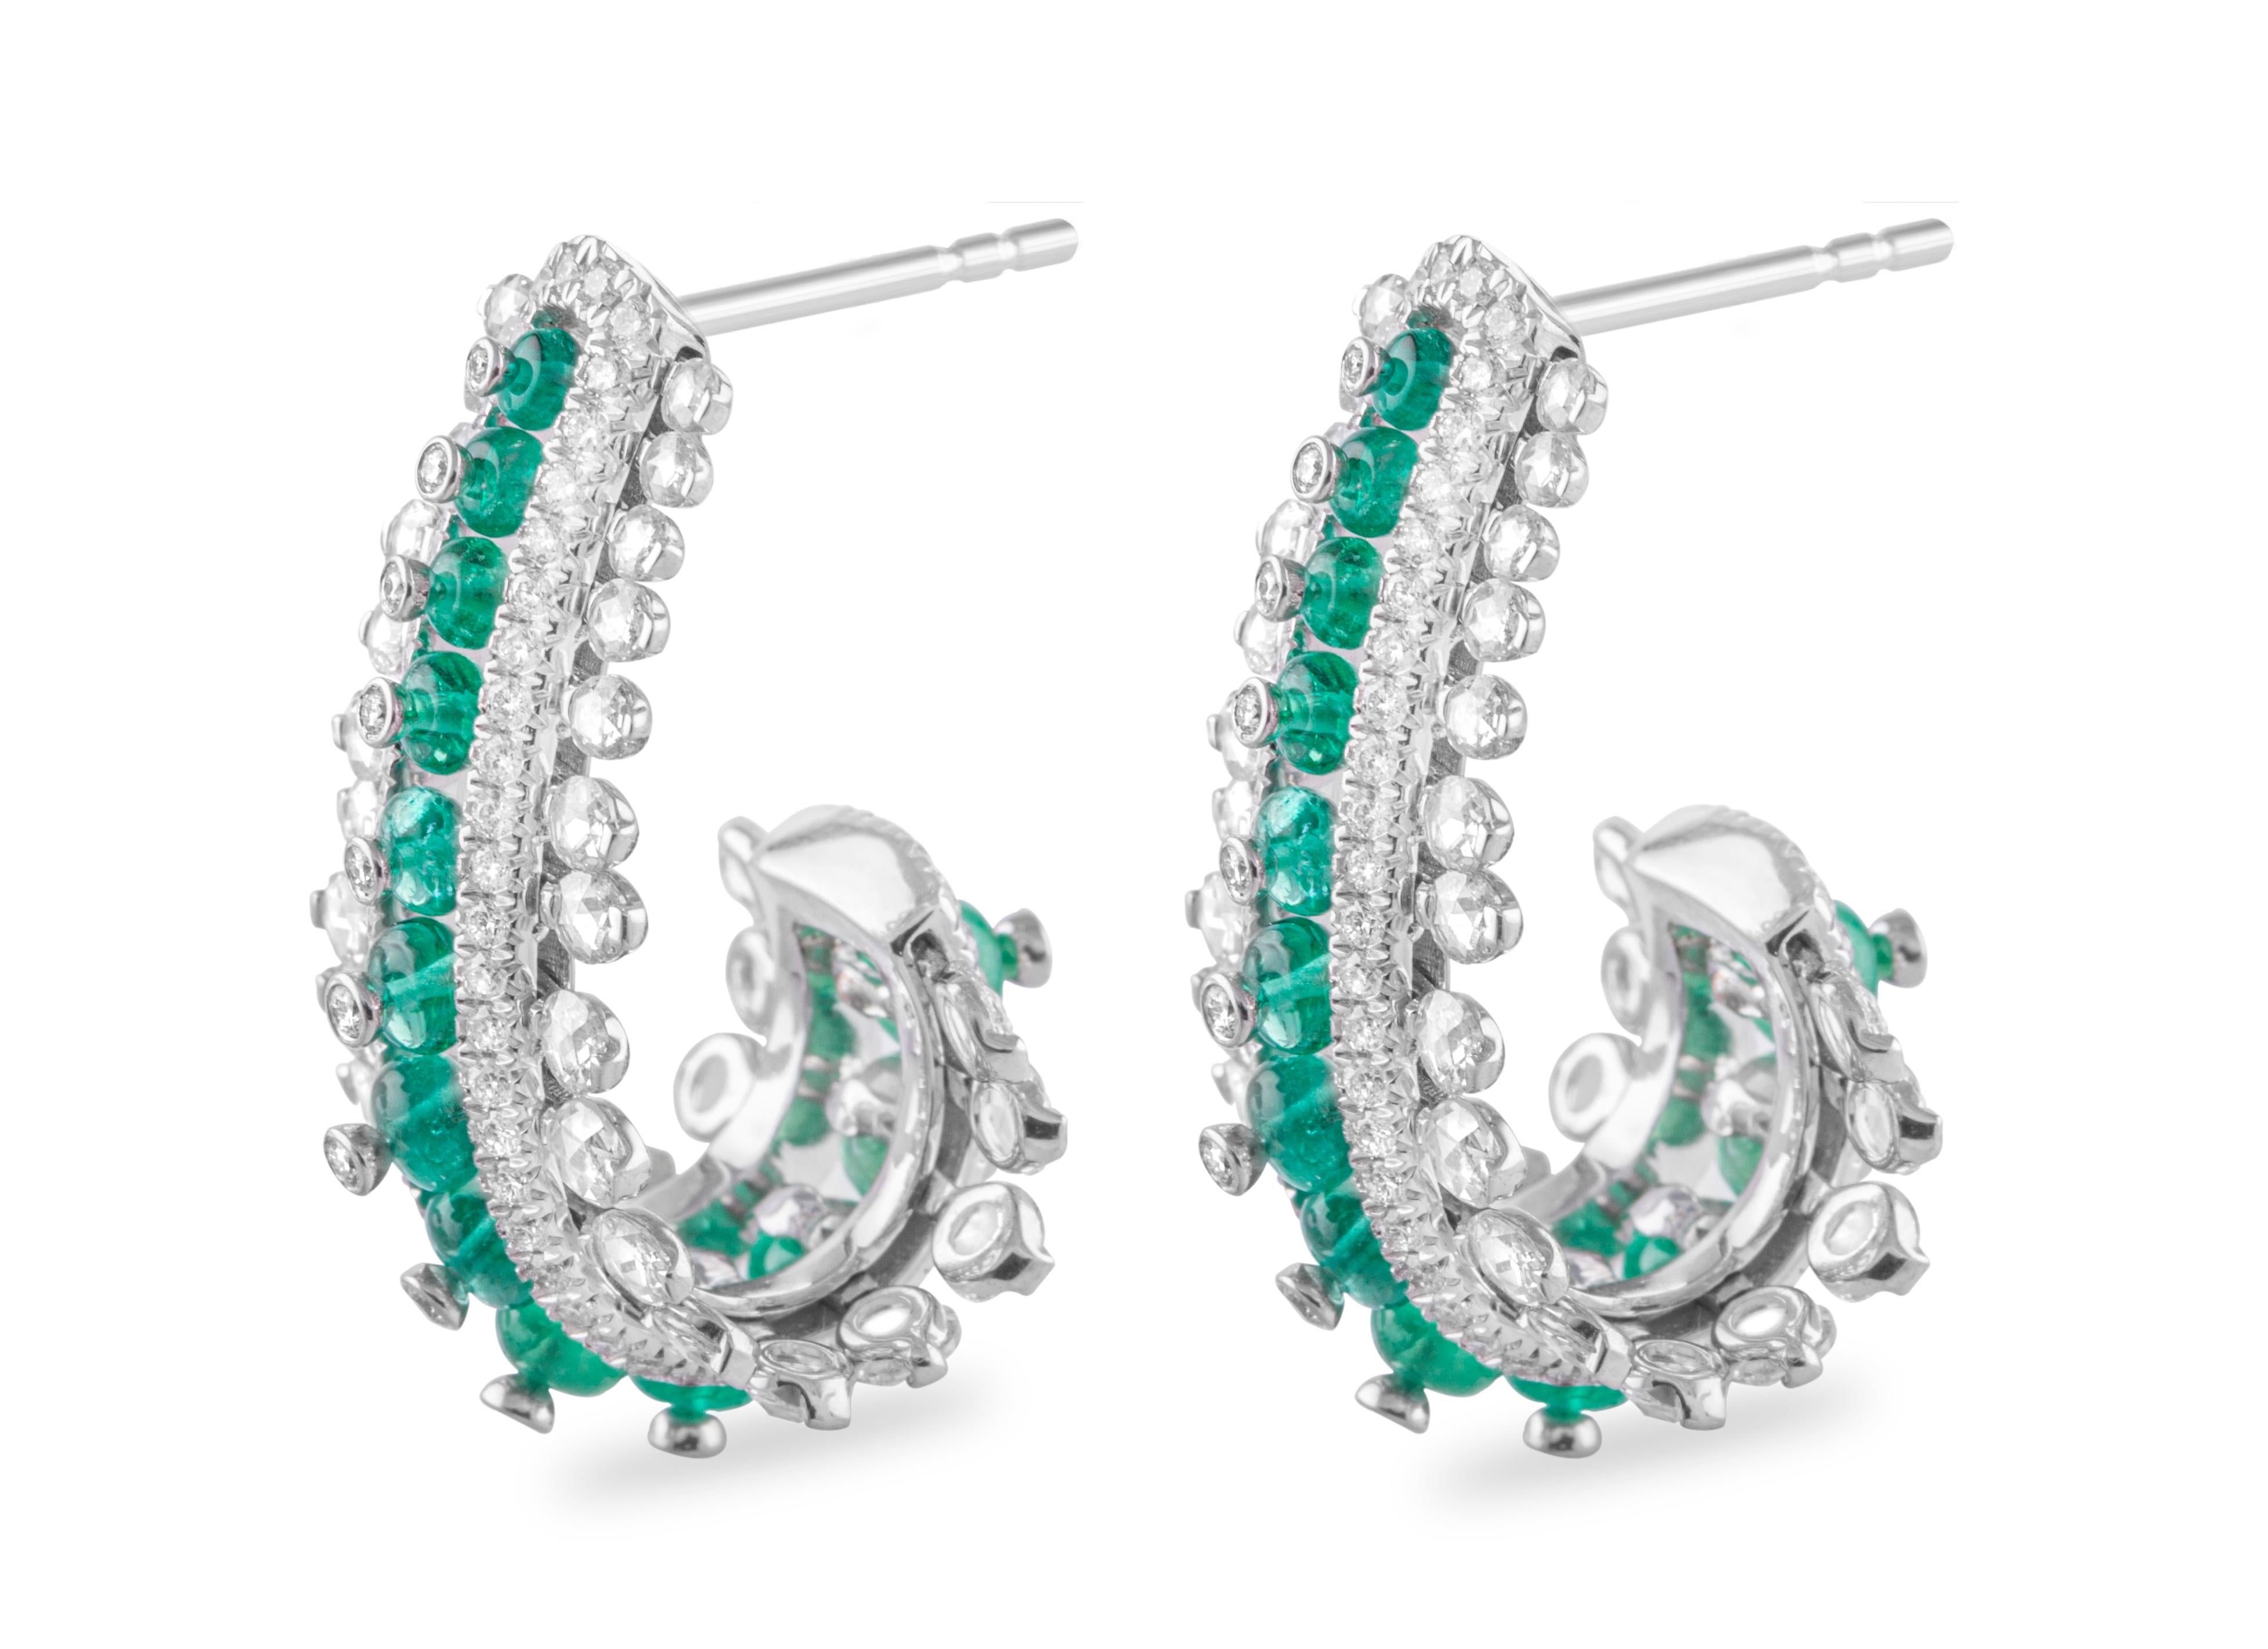 Columbian emeralds beads are delicately set in between two rows of rose-cut diamonds that appear to be suspended in mid-air in these gorgeous earrings in 18 karat white gold.

Columbian emeralds are an extremely sought-after variety of emerald